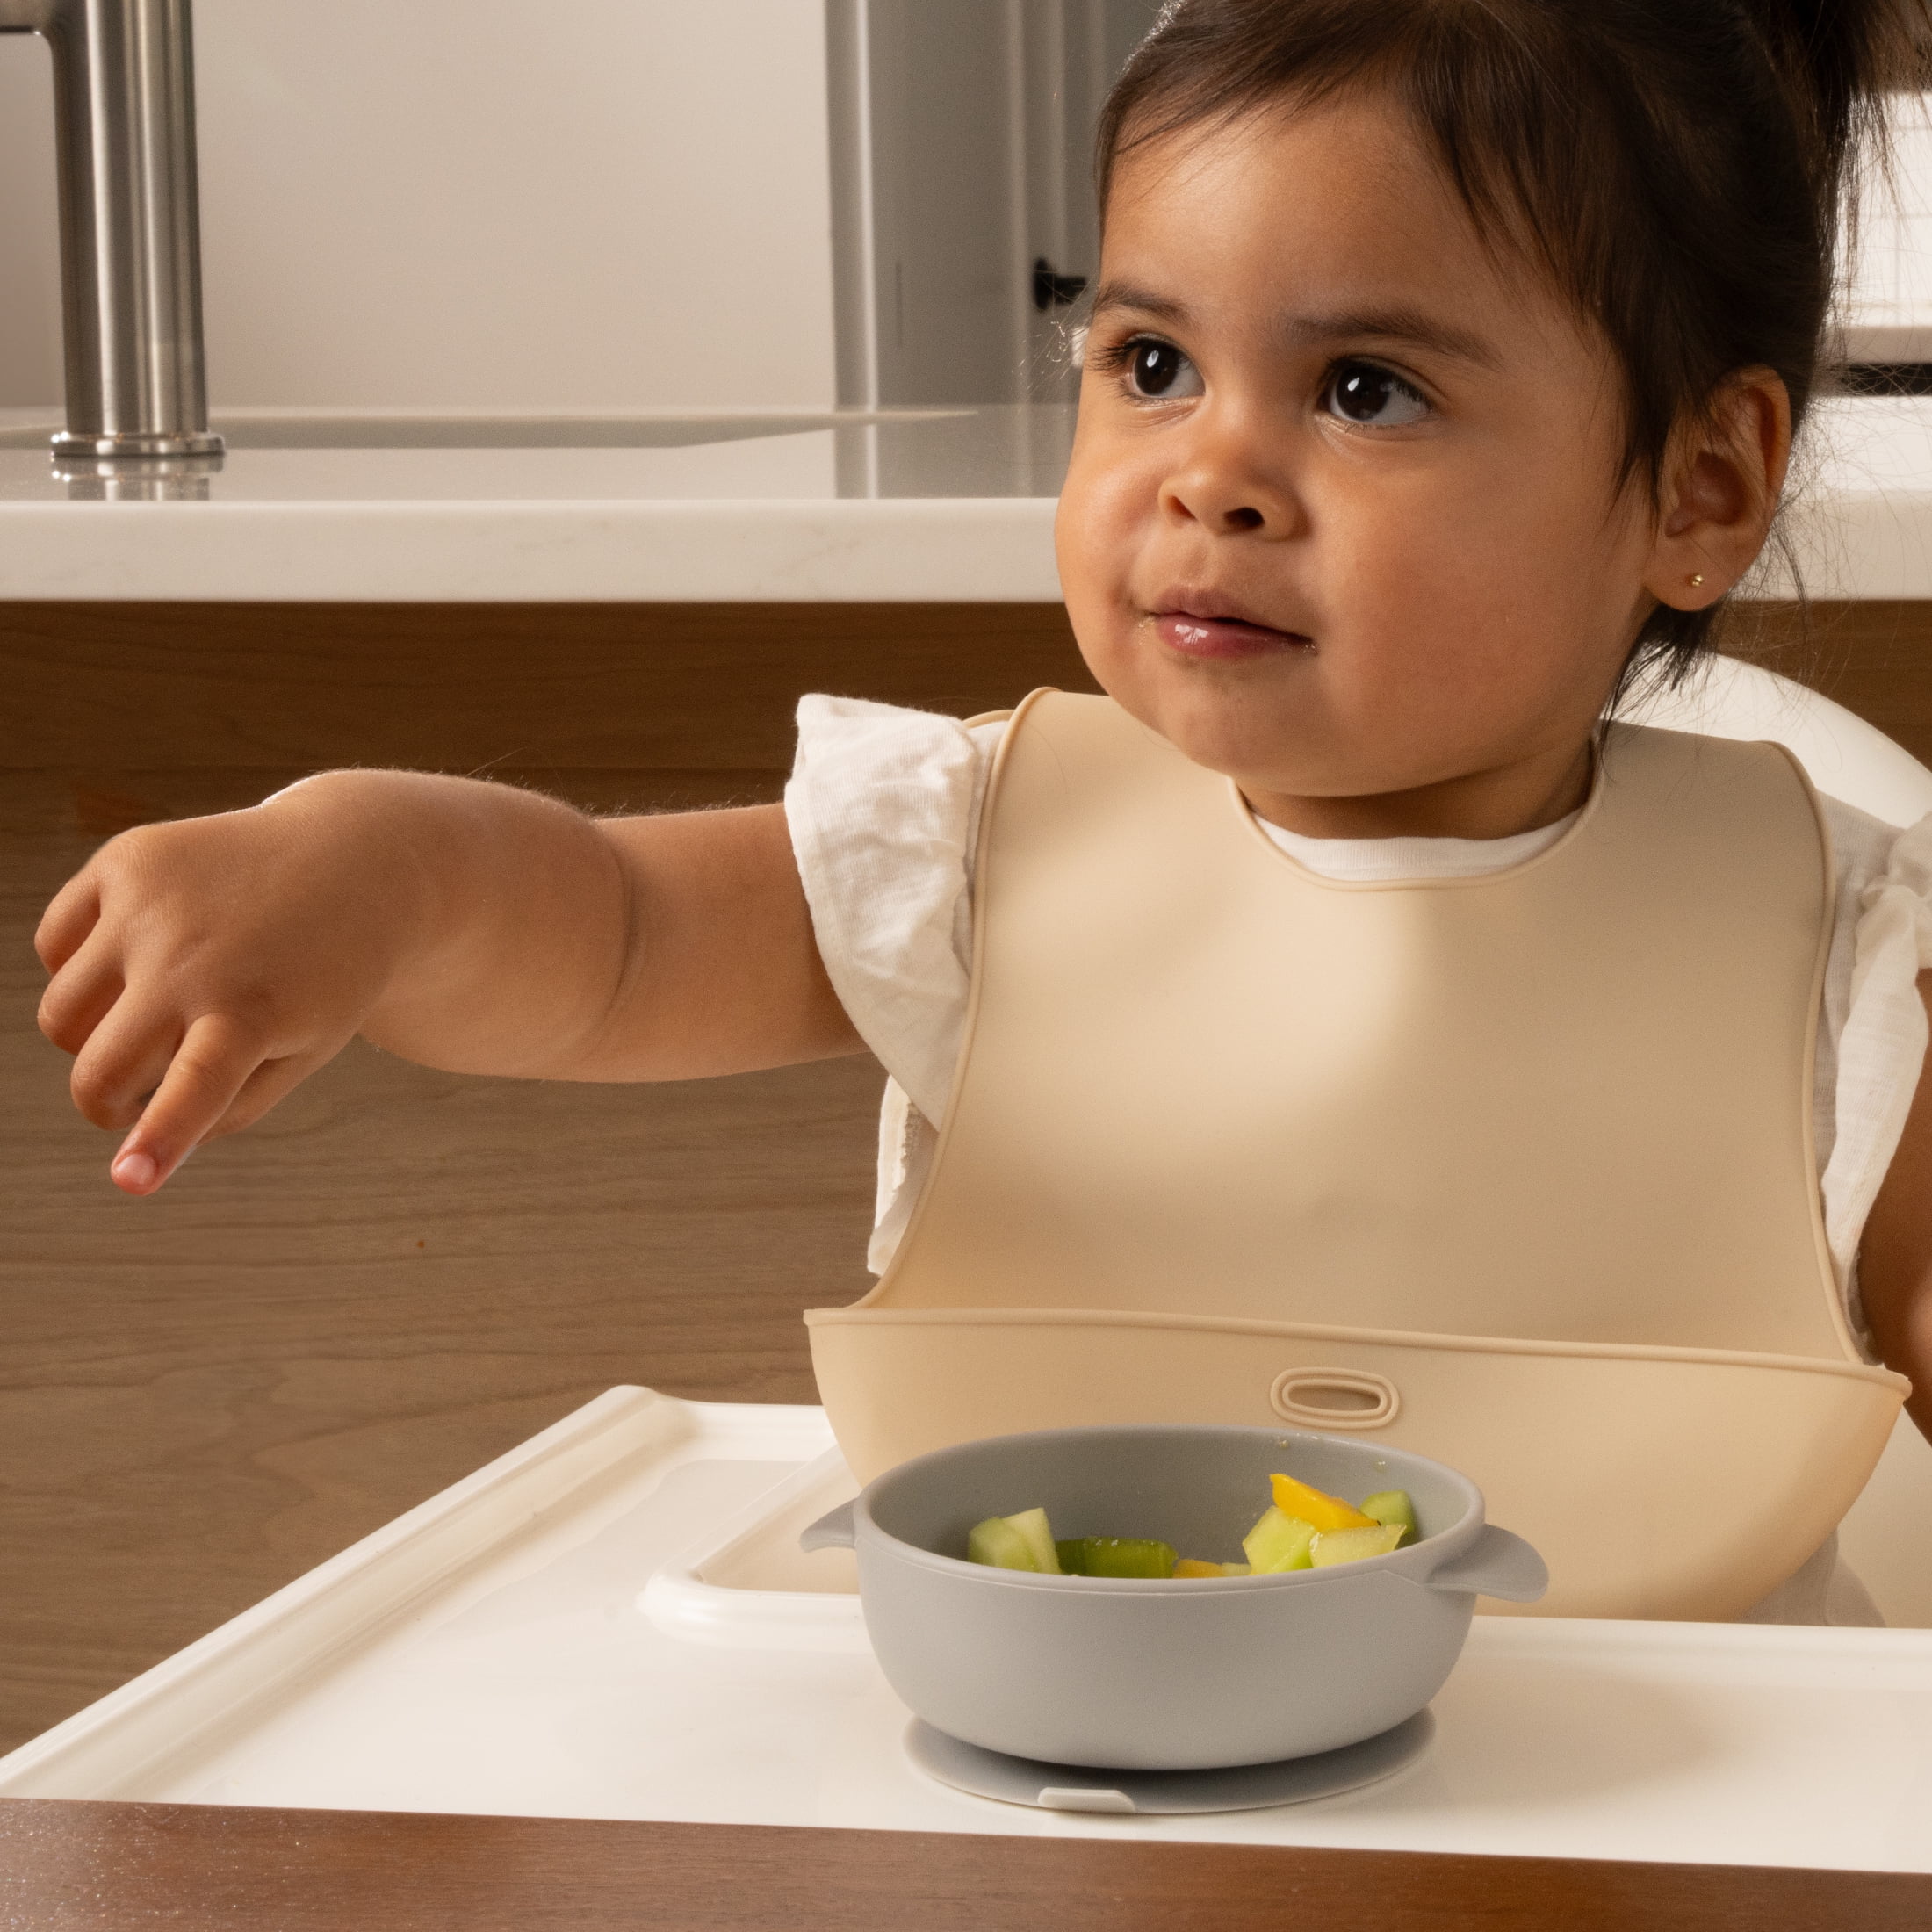 Baby Led Weaning Feeding Supplies for Toddlers - UpwardBaby Baby